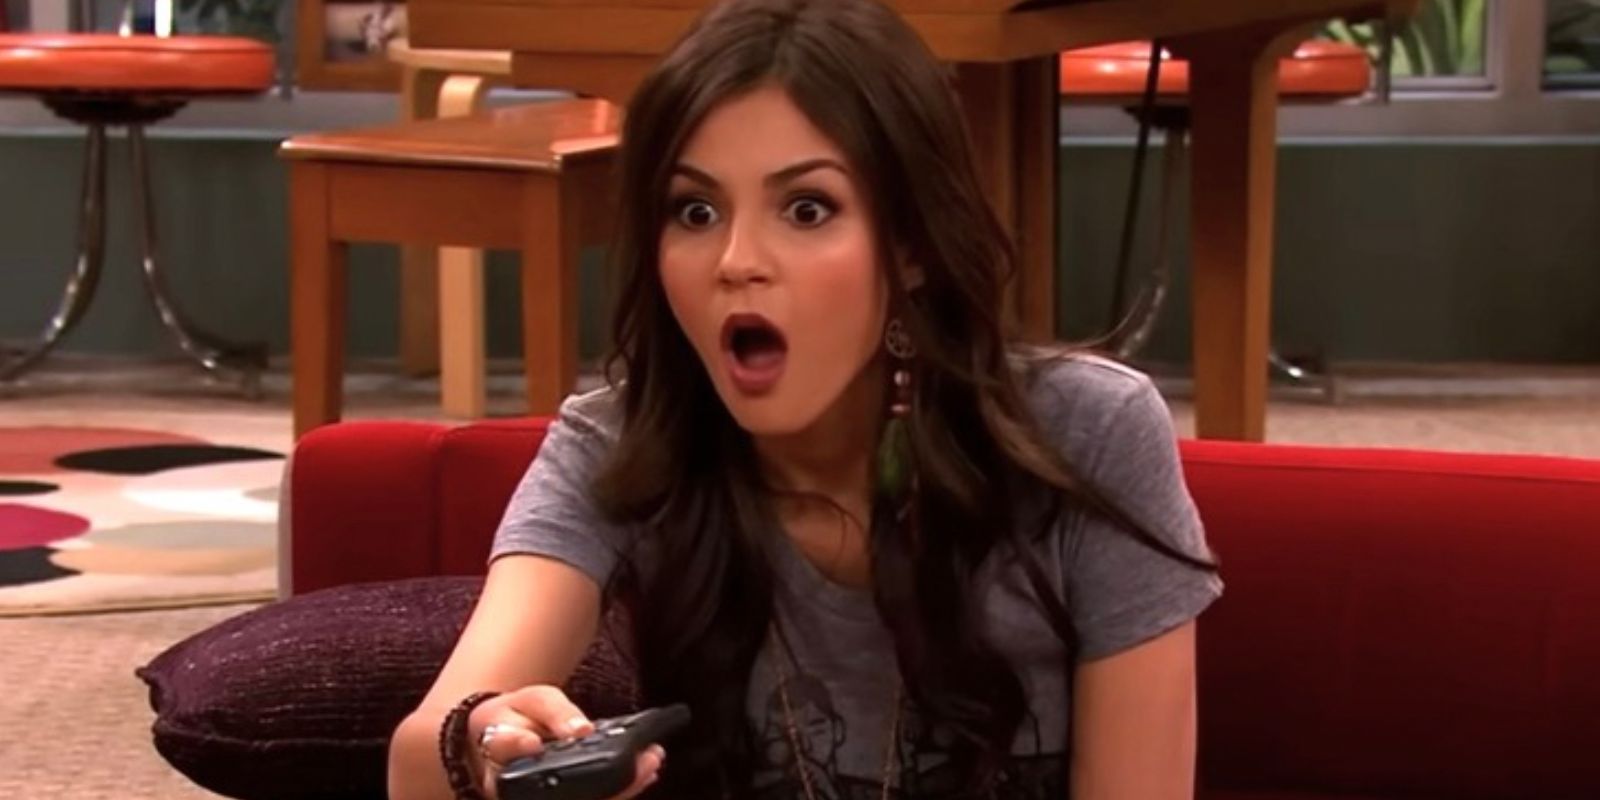 Tori pointing a TV remote and appearing shocked in Victorious